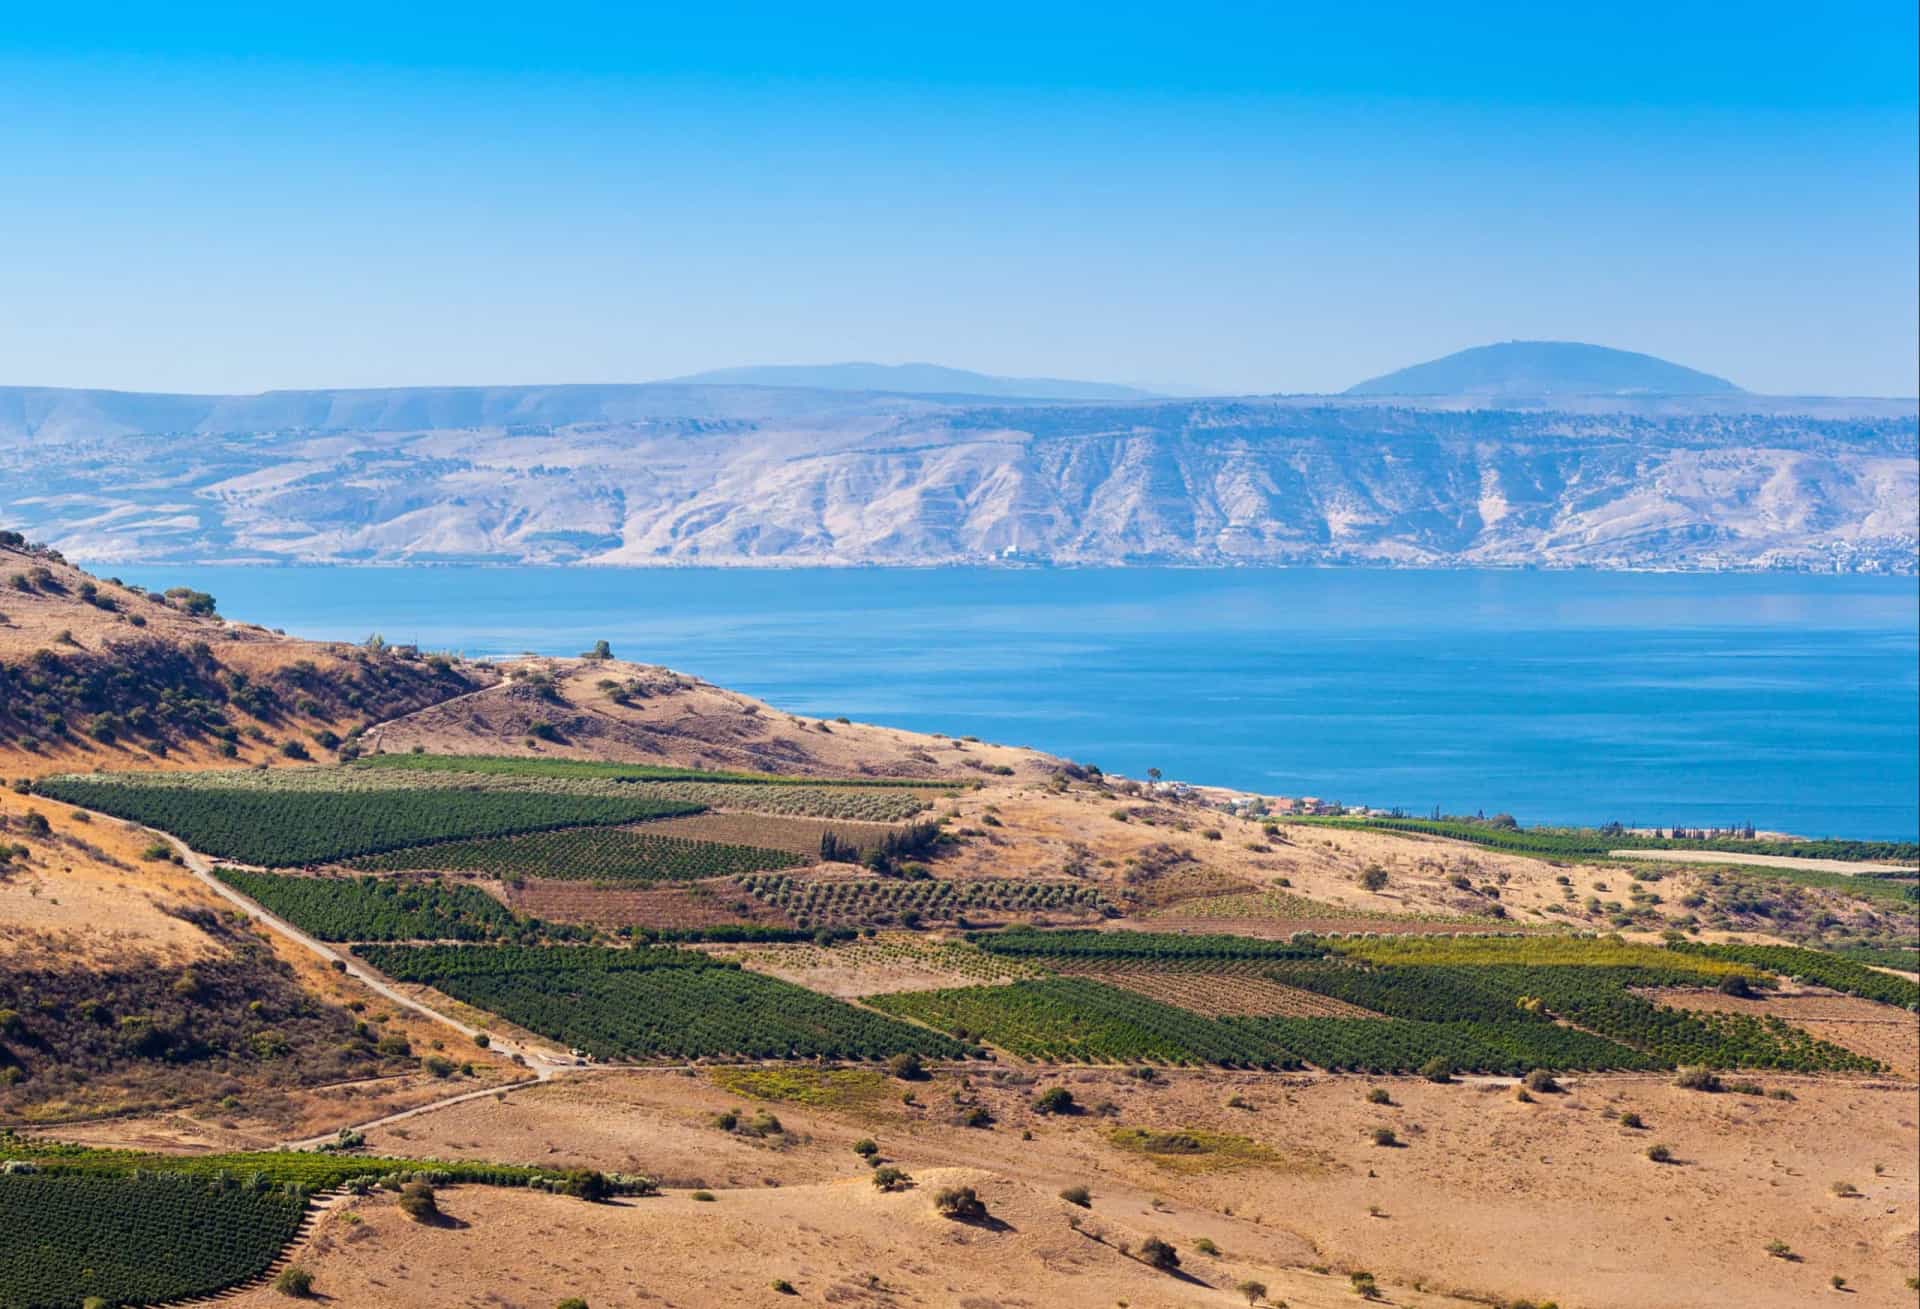 <p>According to the New Testament, much of the ministry of Jesus takes place on the shores of the Sea of Galilee. Four of Jesus' apostles were recruited here—Andrew, James, John, and Peter, who had all been earning a living by fishing in the area.</p>